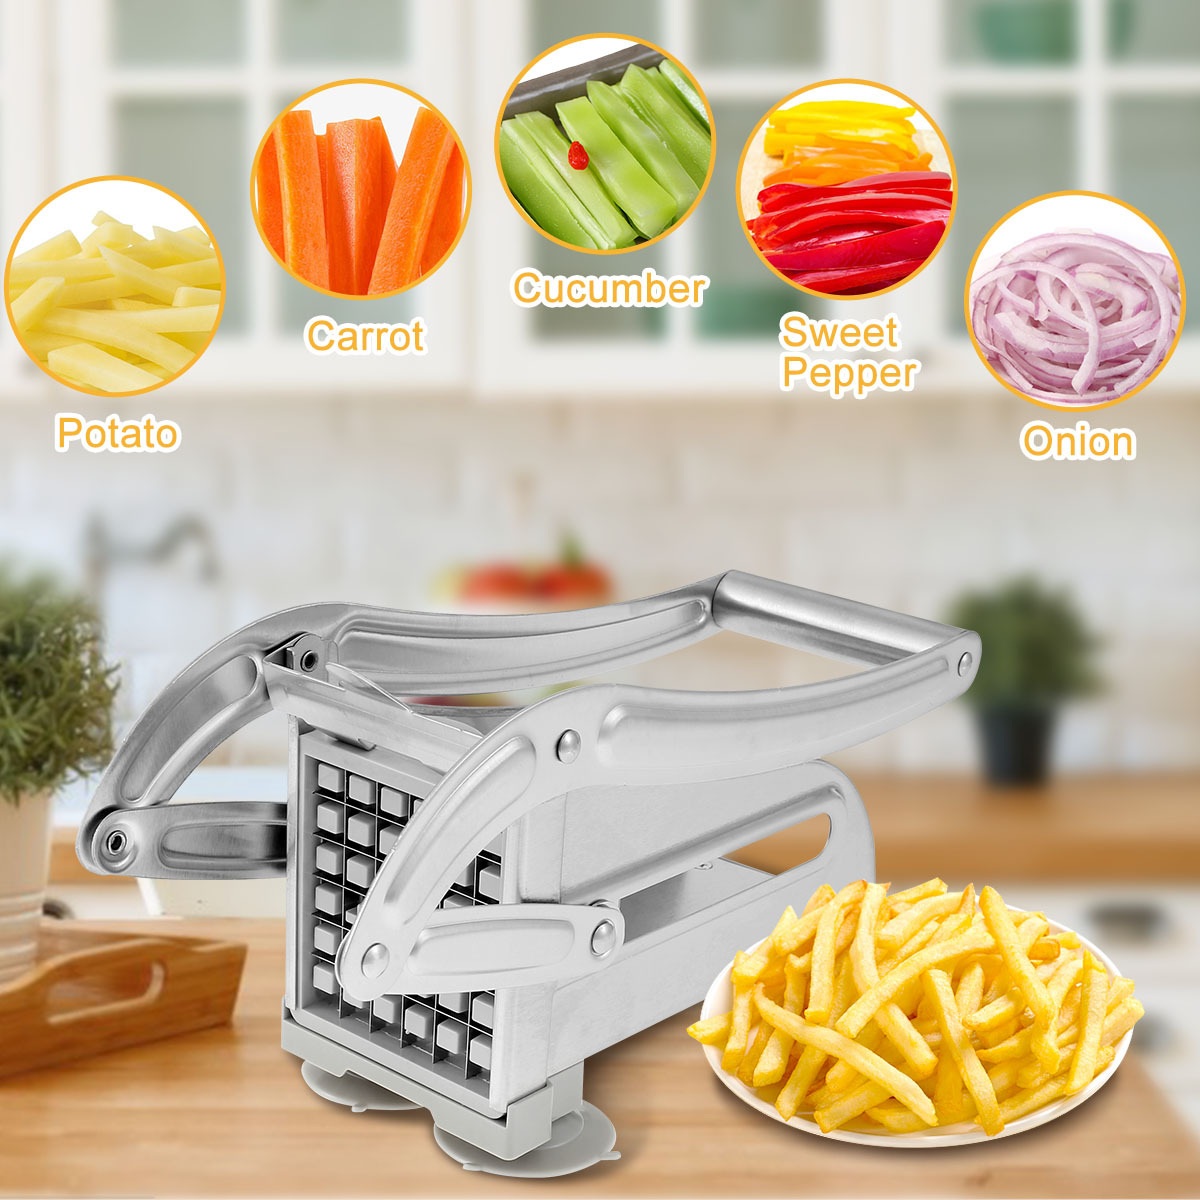 https://img.kwcdn.com/product/french-fry-cutter/d69d2f15w98k18-1a2f2991/open/2023-12-05/1701751035228-457265bba1784d3298794a38a8034c9e-goods.jpeg